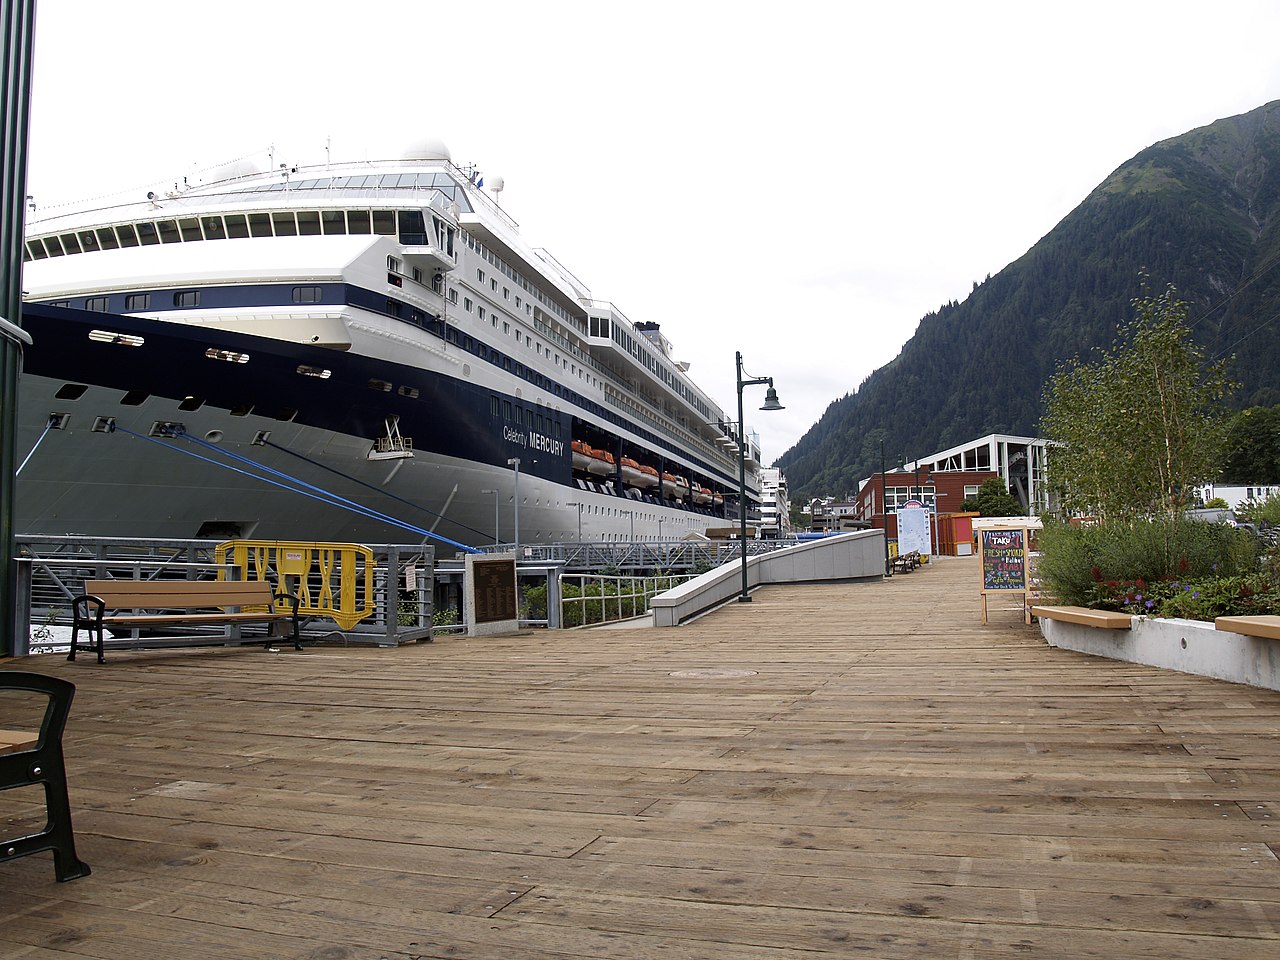 <p>A Norovirus outbreak is common on cruise ships, but this was one of the worst cases at the time. The incident made headlines as this was not this particular ship’s first (or recent) outbreak.</p>  <p>The following scheduled cruise was delayed so the ship could receive extra sanitizing.</p>